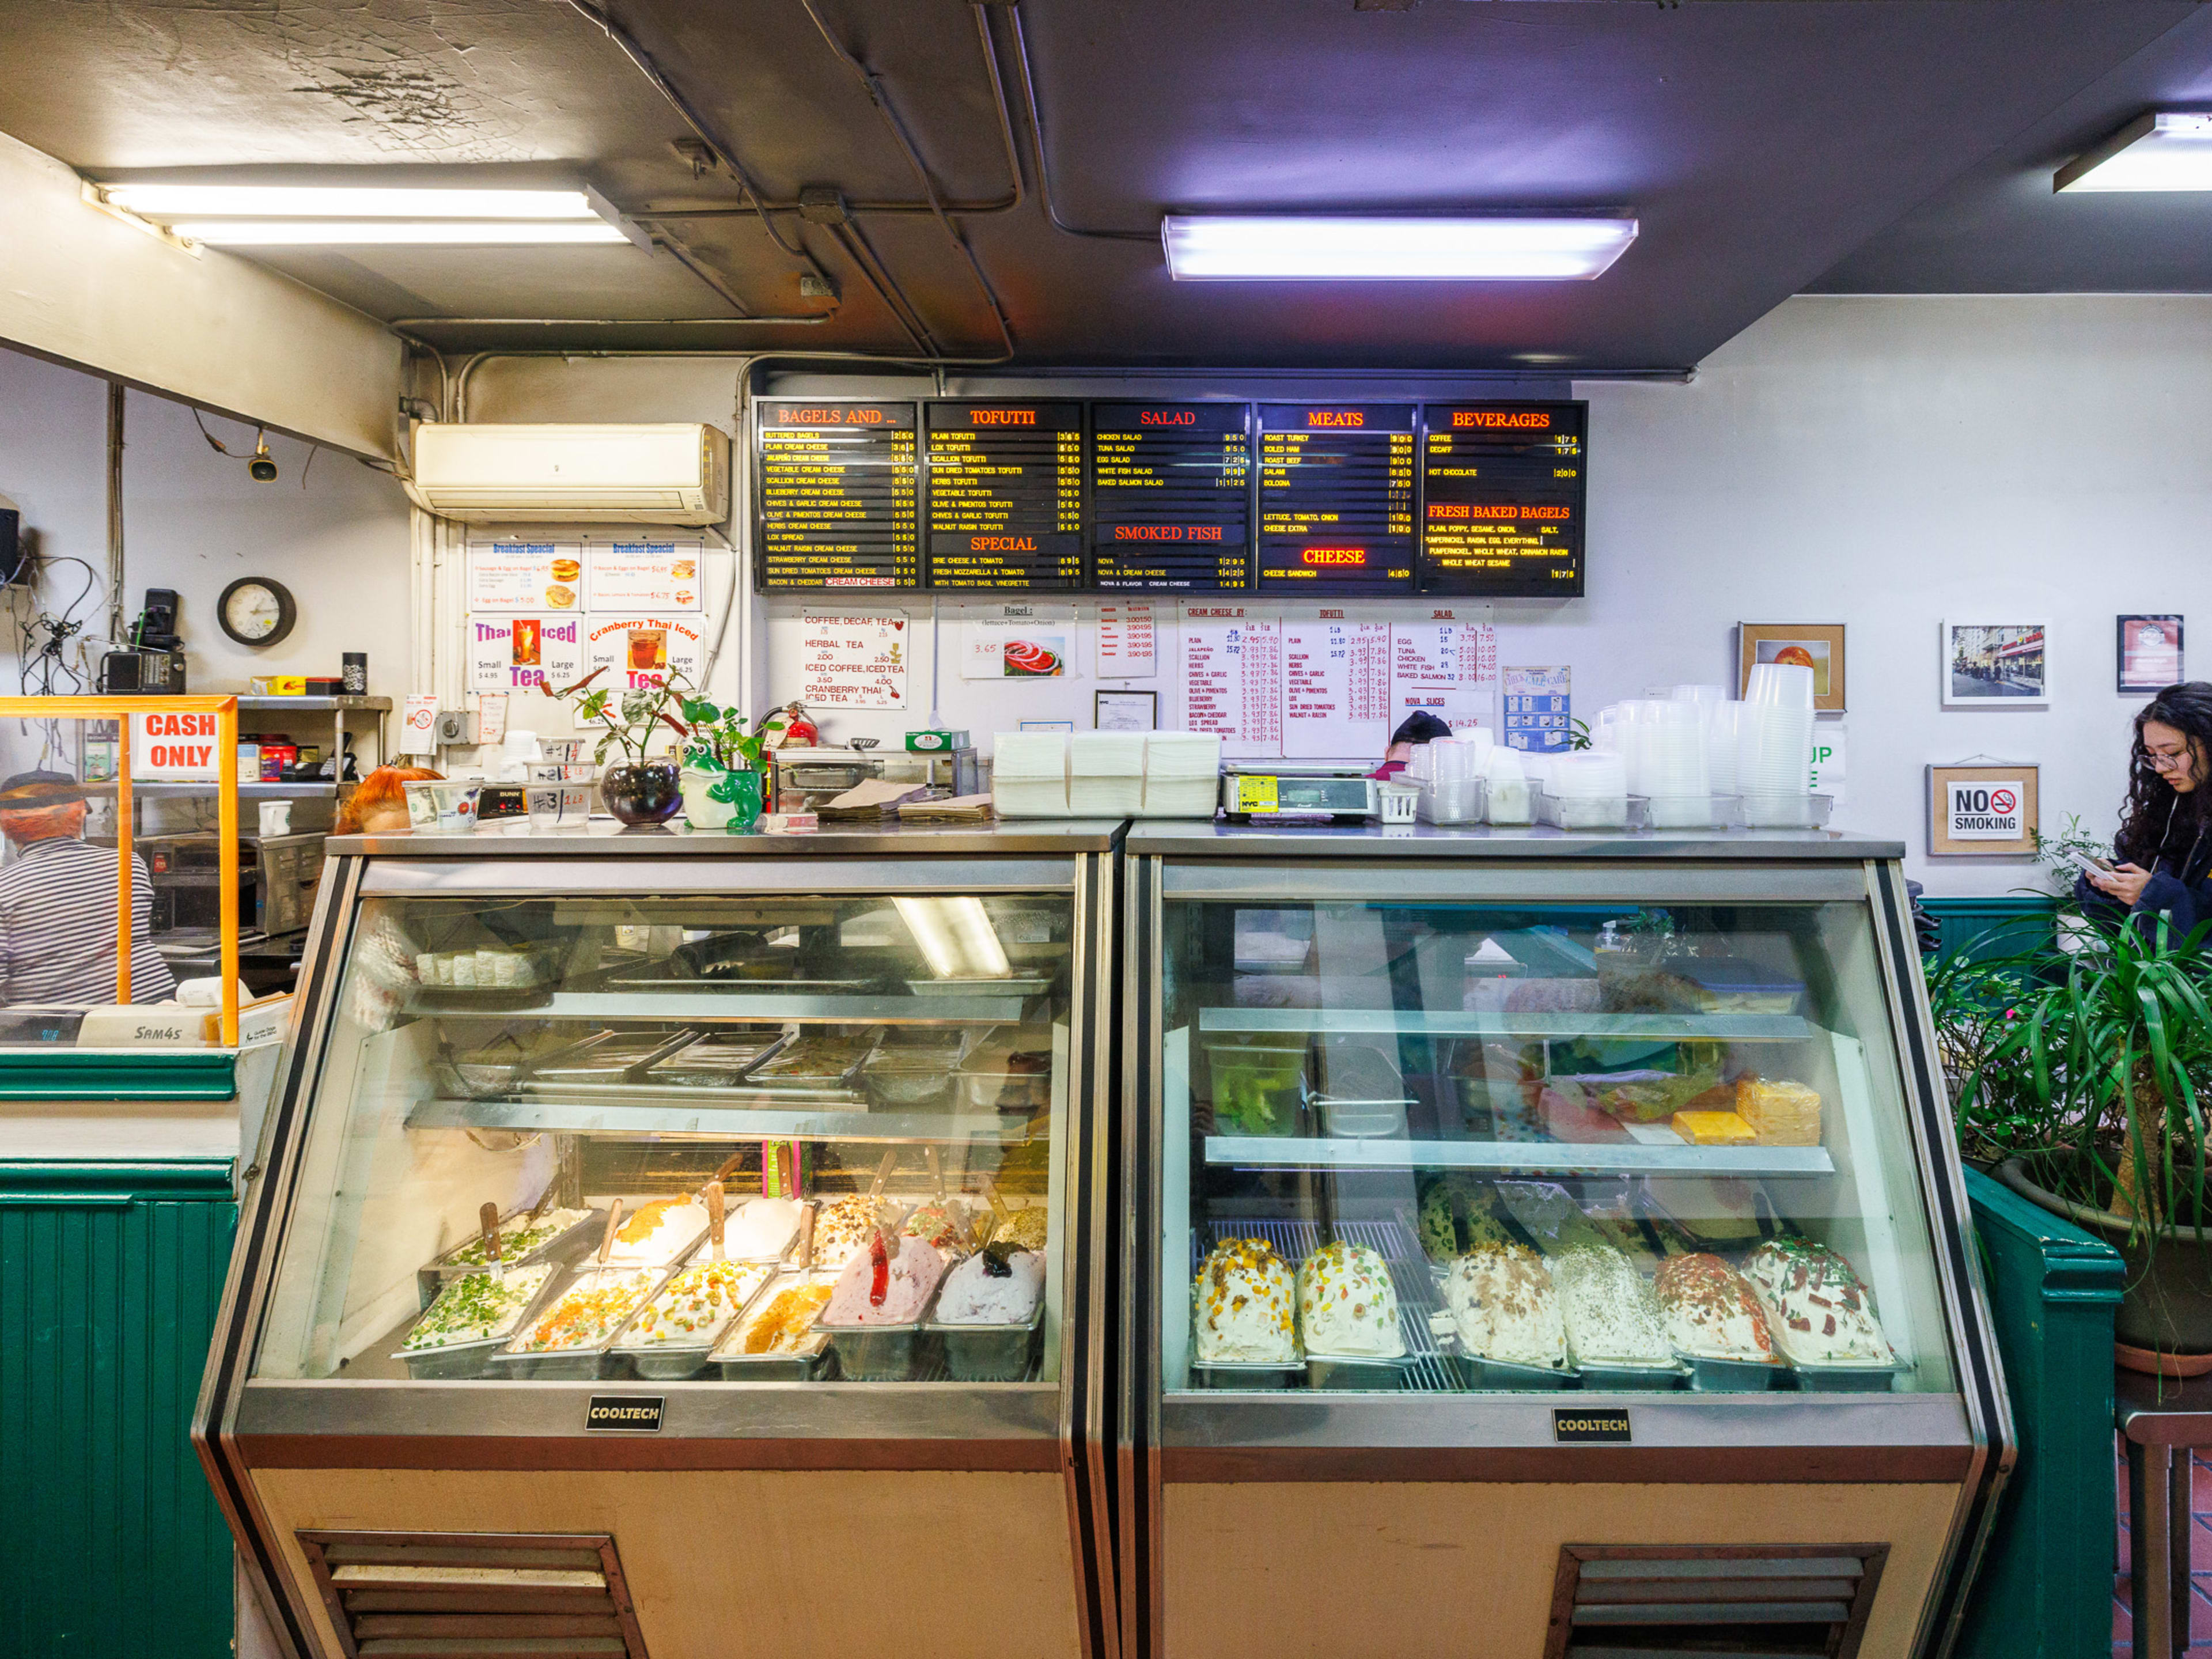 The deli case at Absolute Bagels. There is a person waiting for their order on the right and an employee working behind the counter on the left.